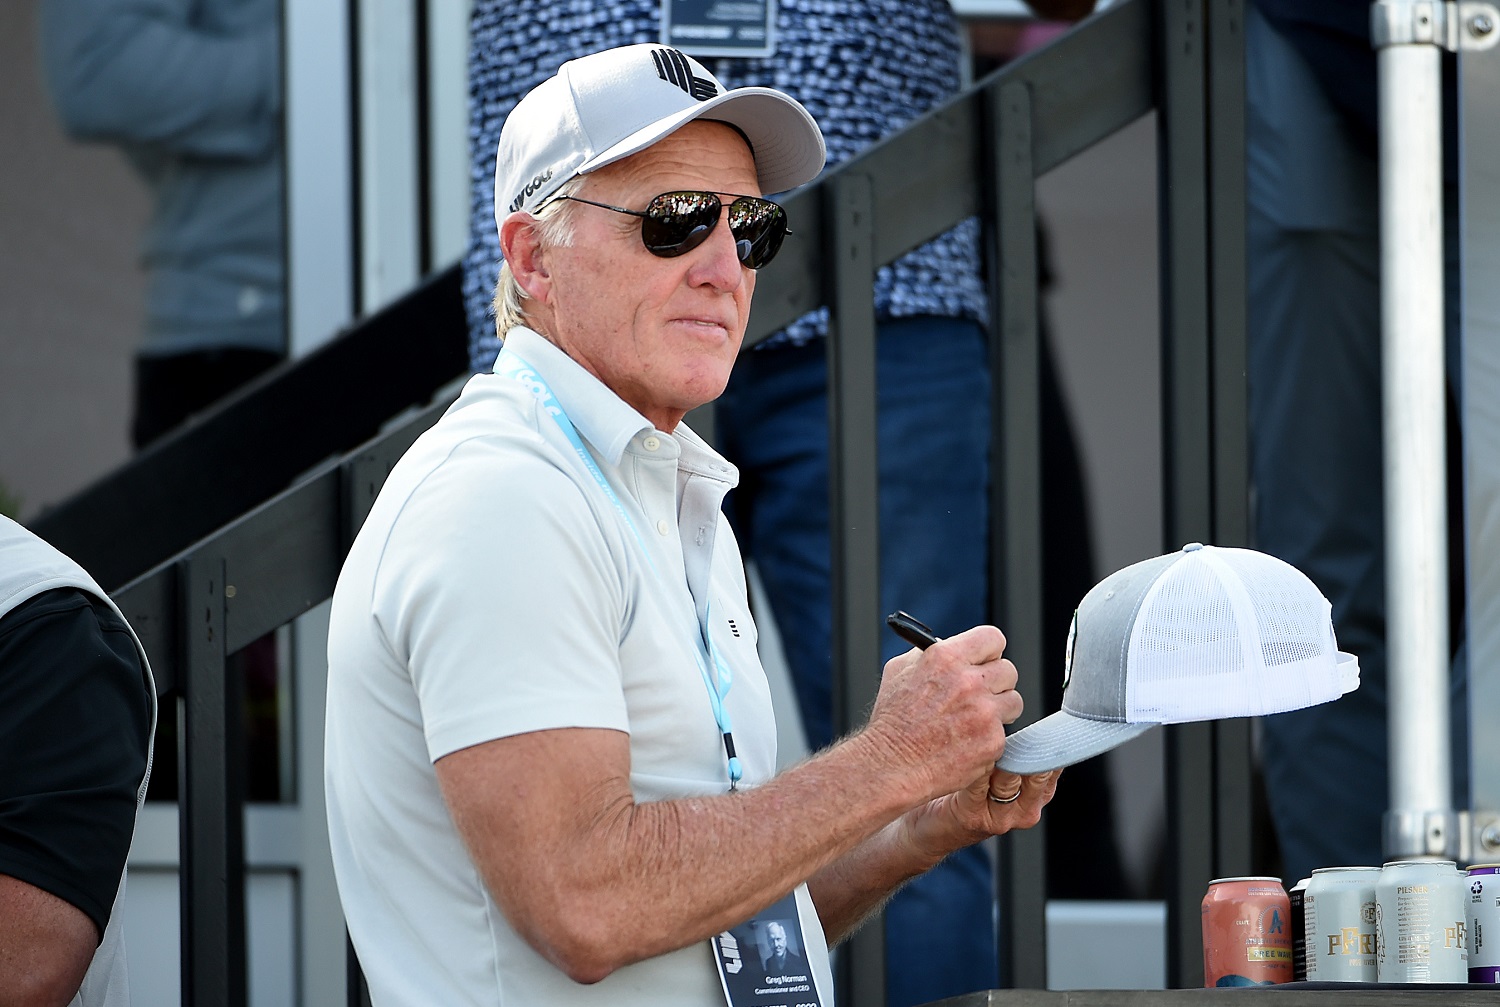 LIV Golf commissioner Greg Norman signs hats during the final round of the LIV Golf Invitational - Portland at Pumpkin Ridge Golf Club on July 2, 2022 in North Plains, Oregon. | Steve Dykes/Getty Images